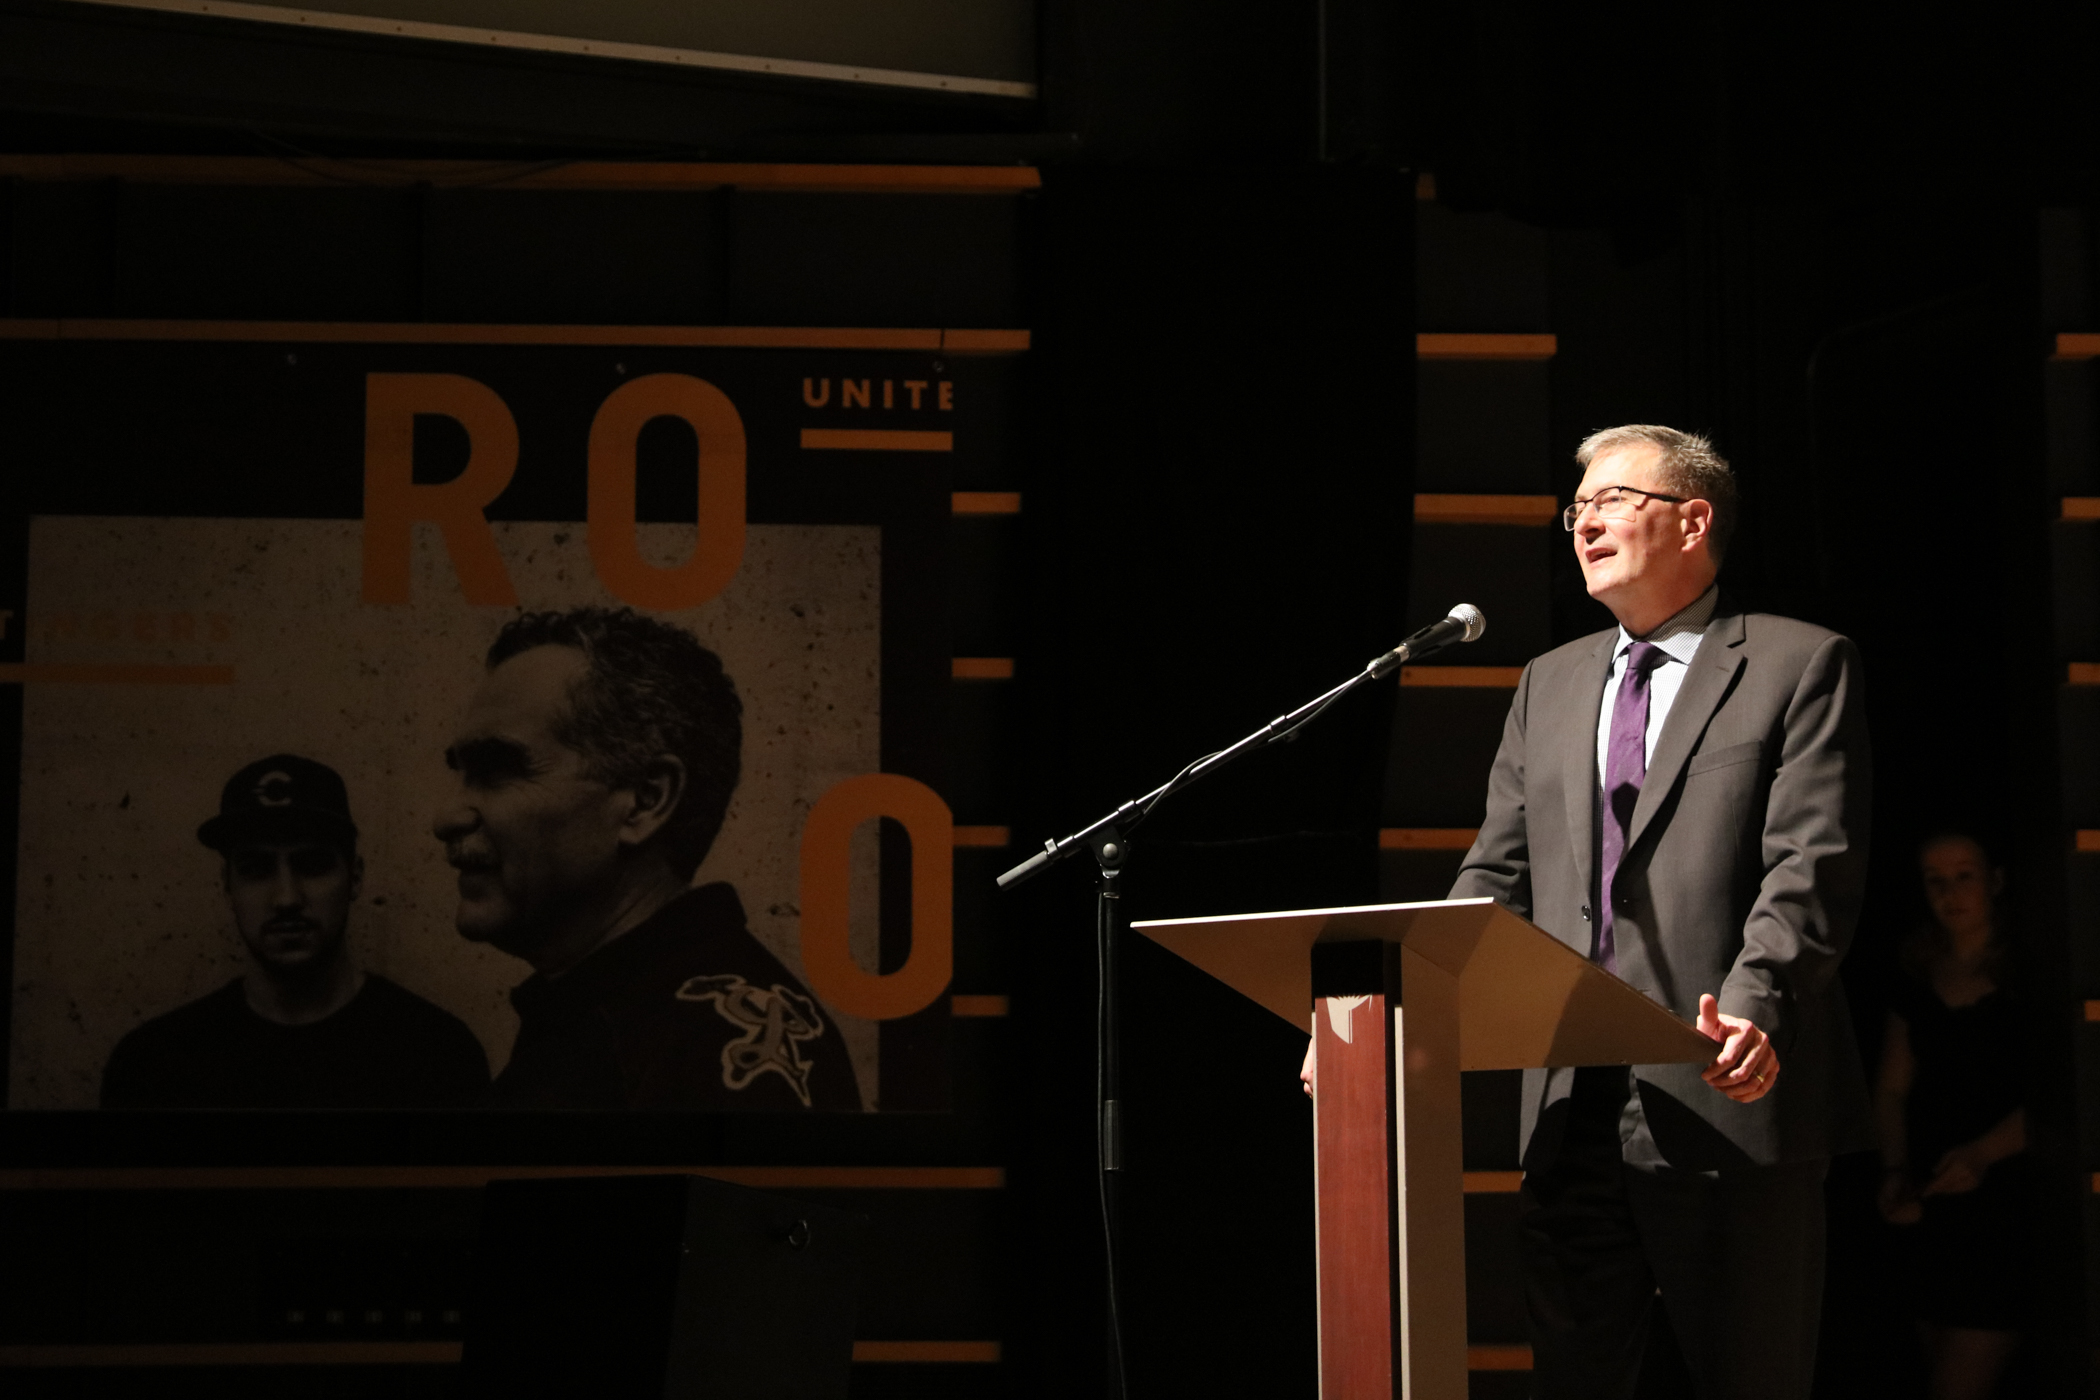 Concordia president Alan Shepard gives a speech at the banquet. Photos by Marie-Pierre Savard.